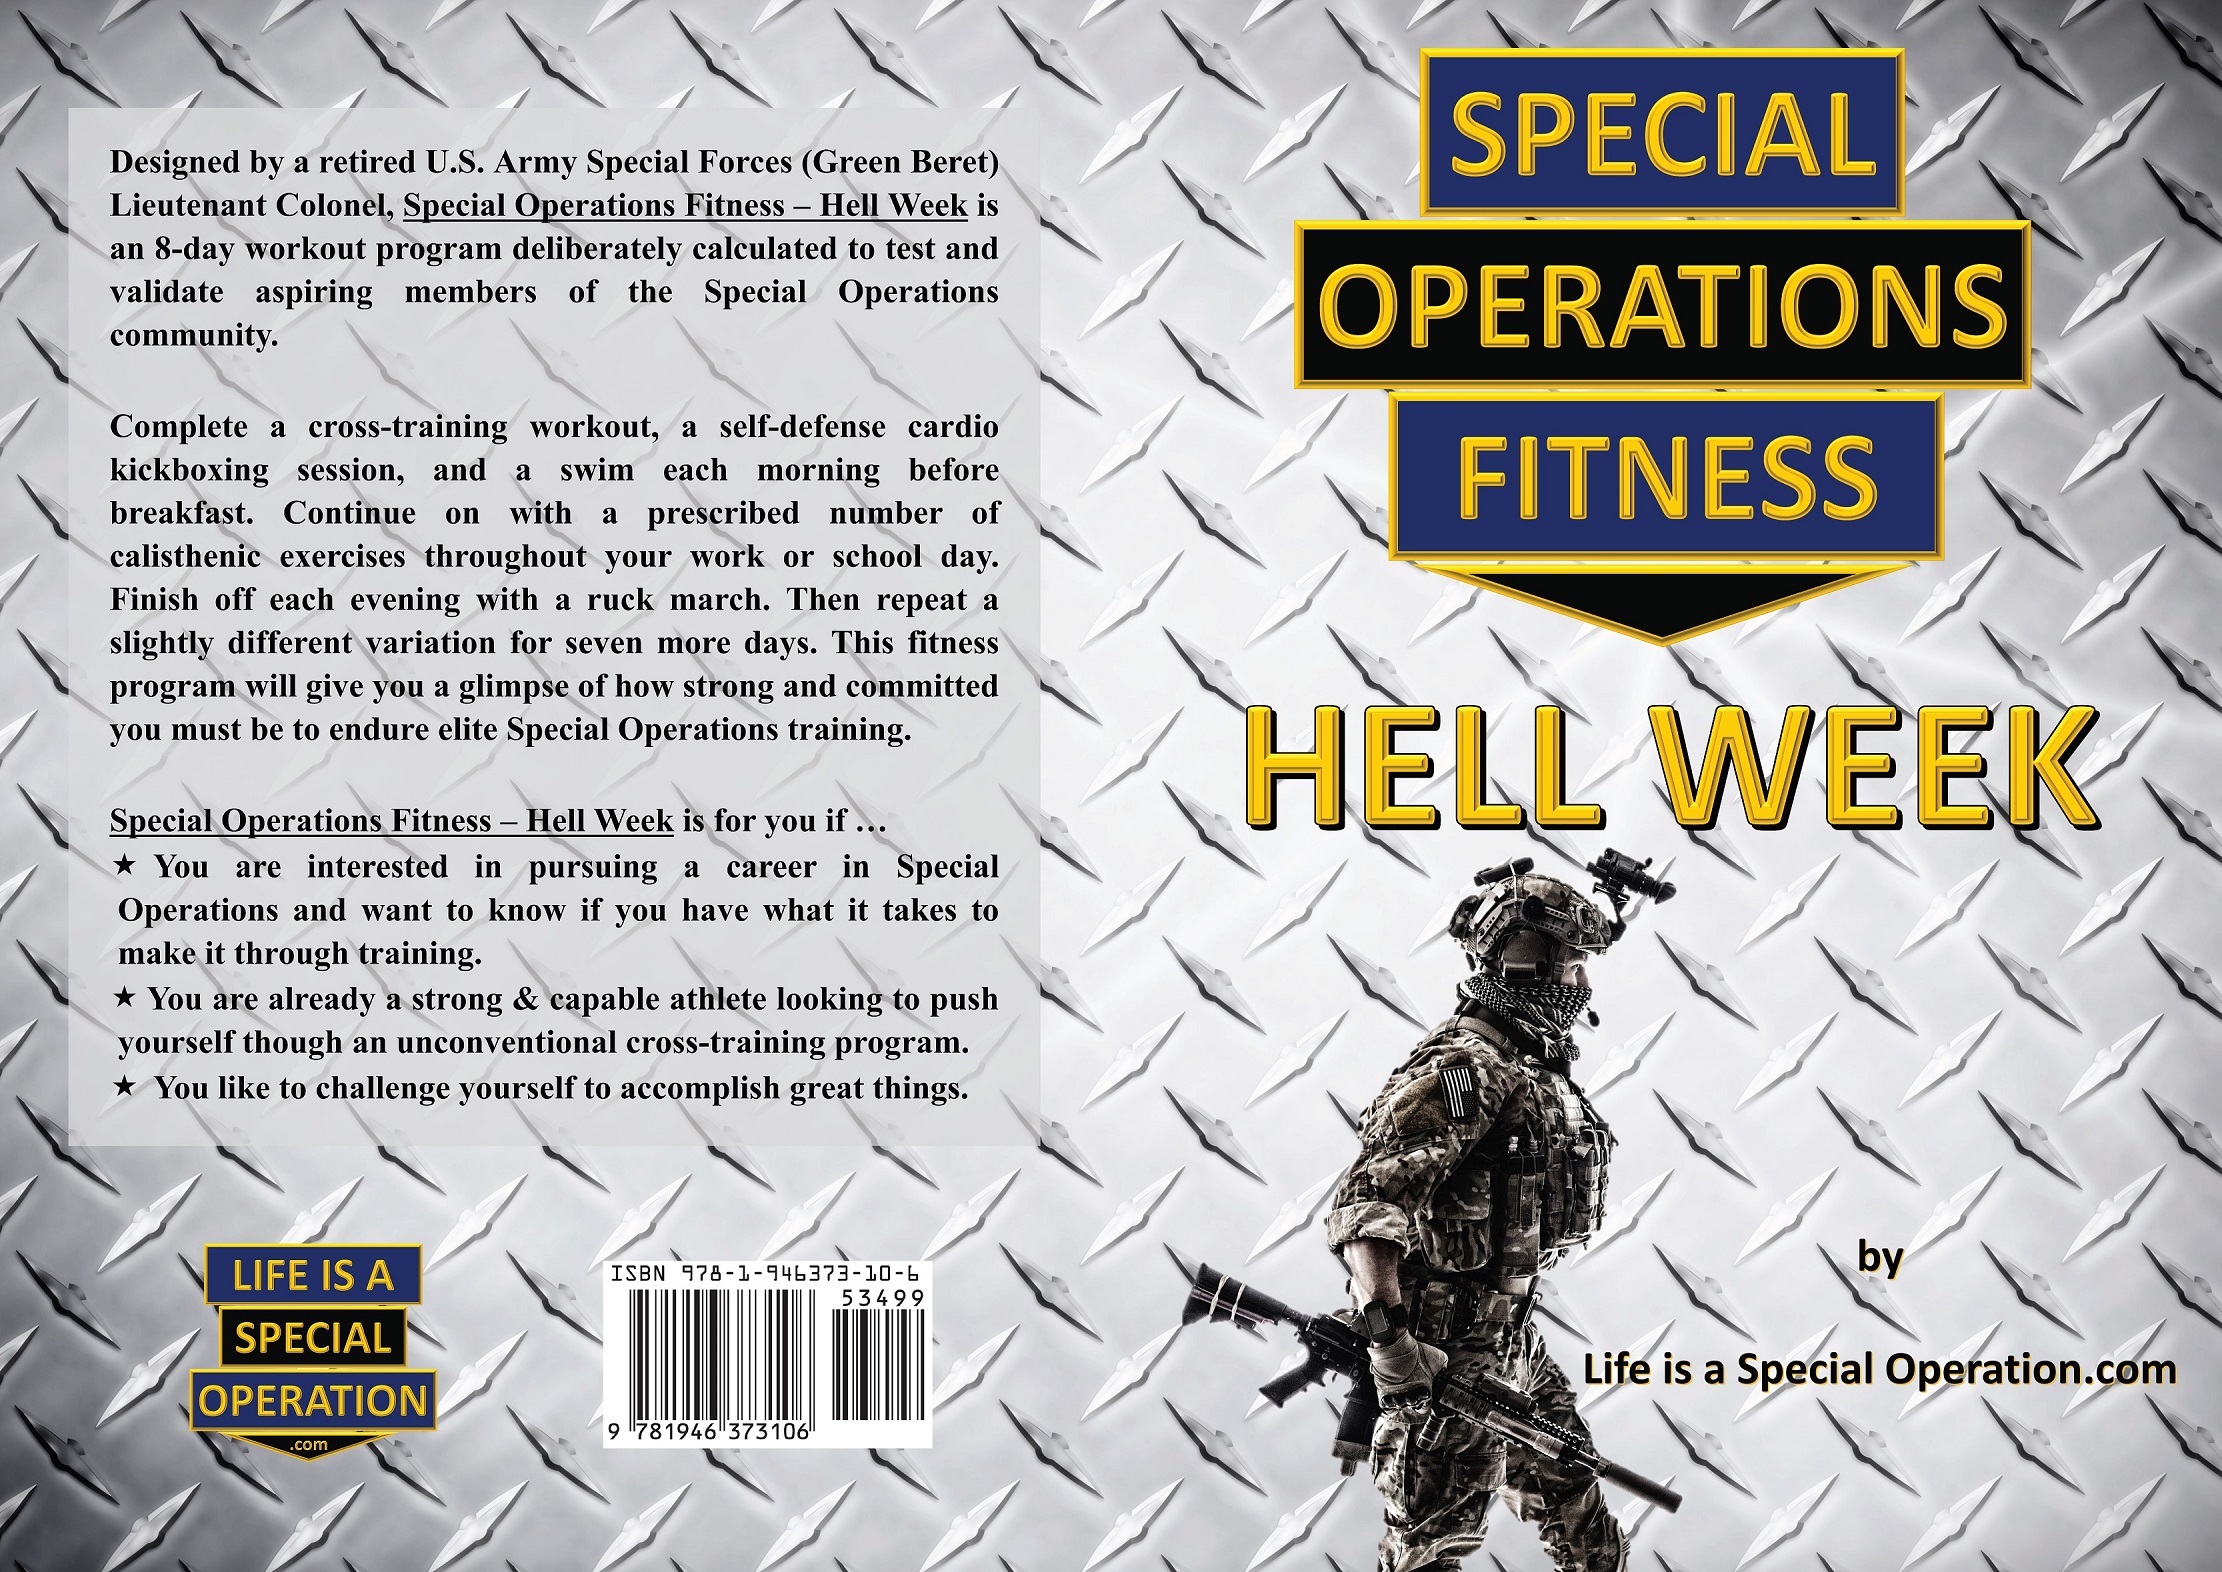 Special Operations Fitness Week